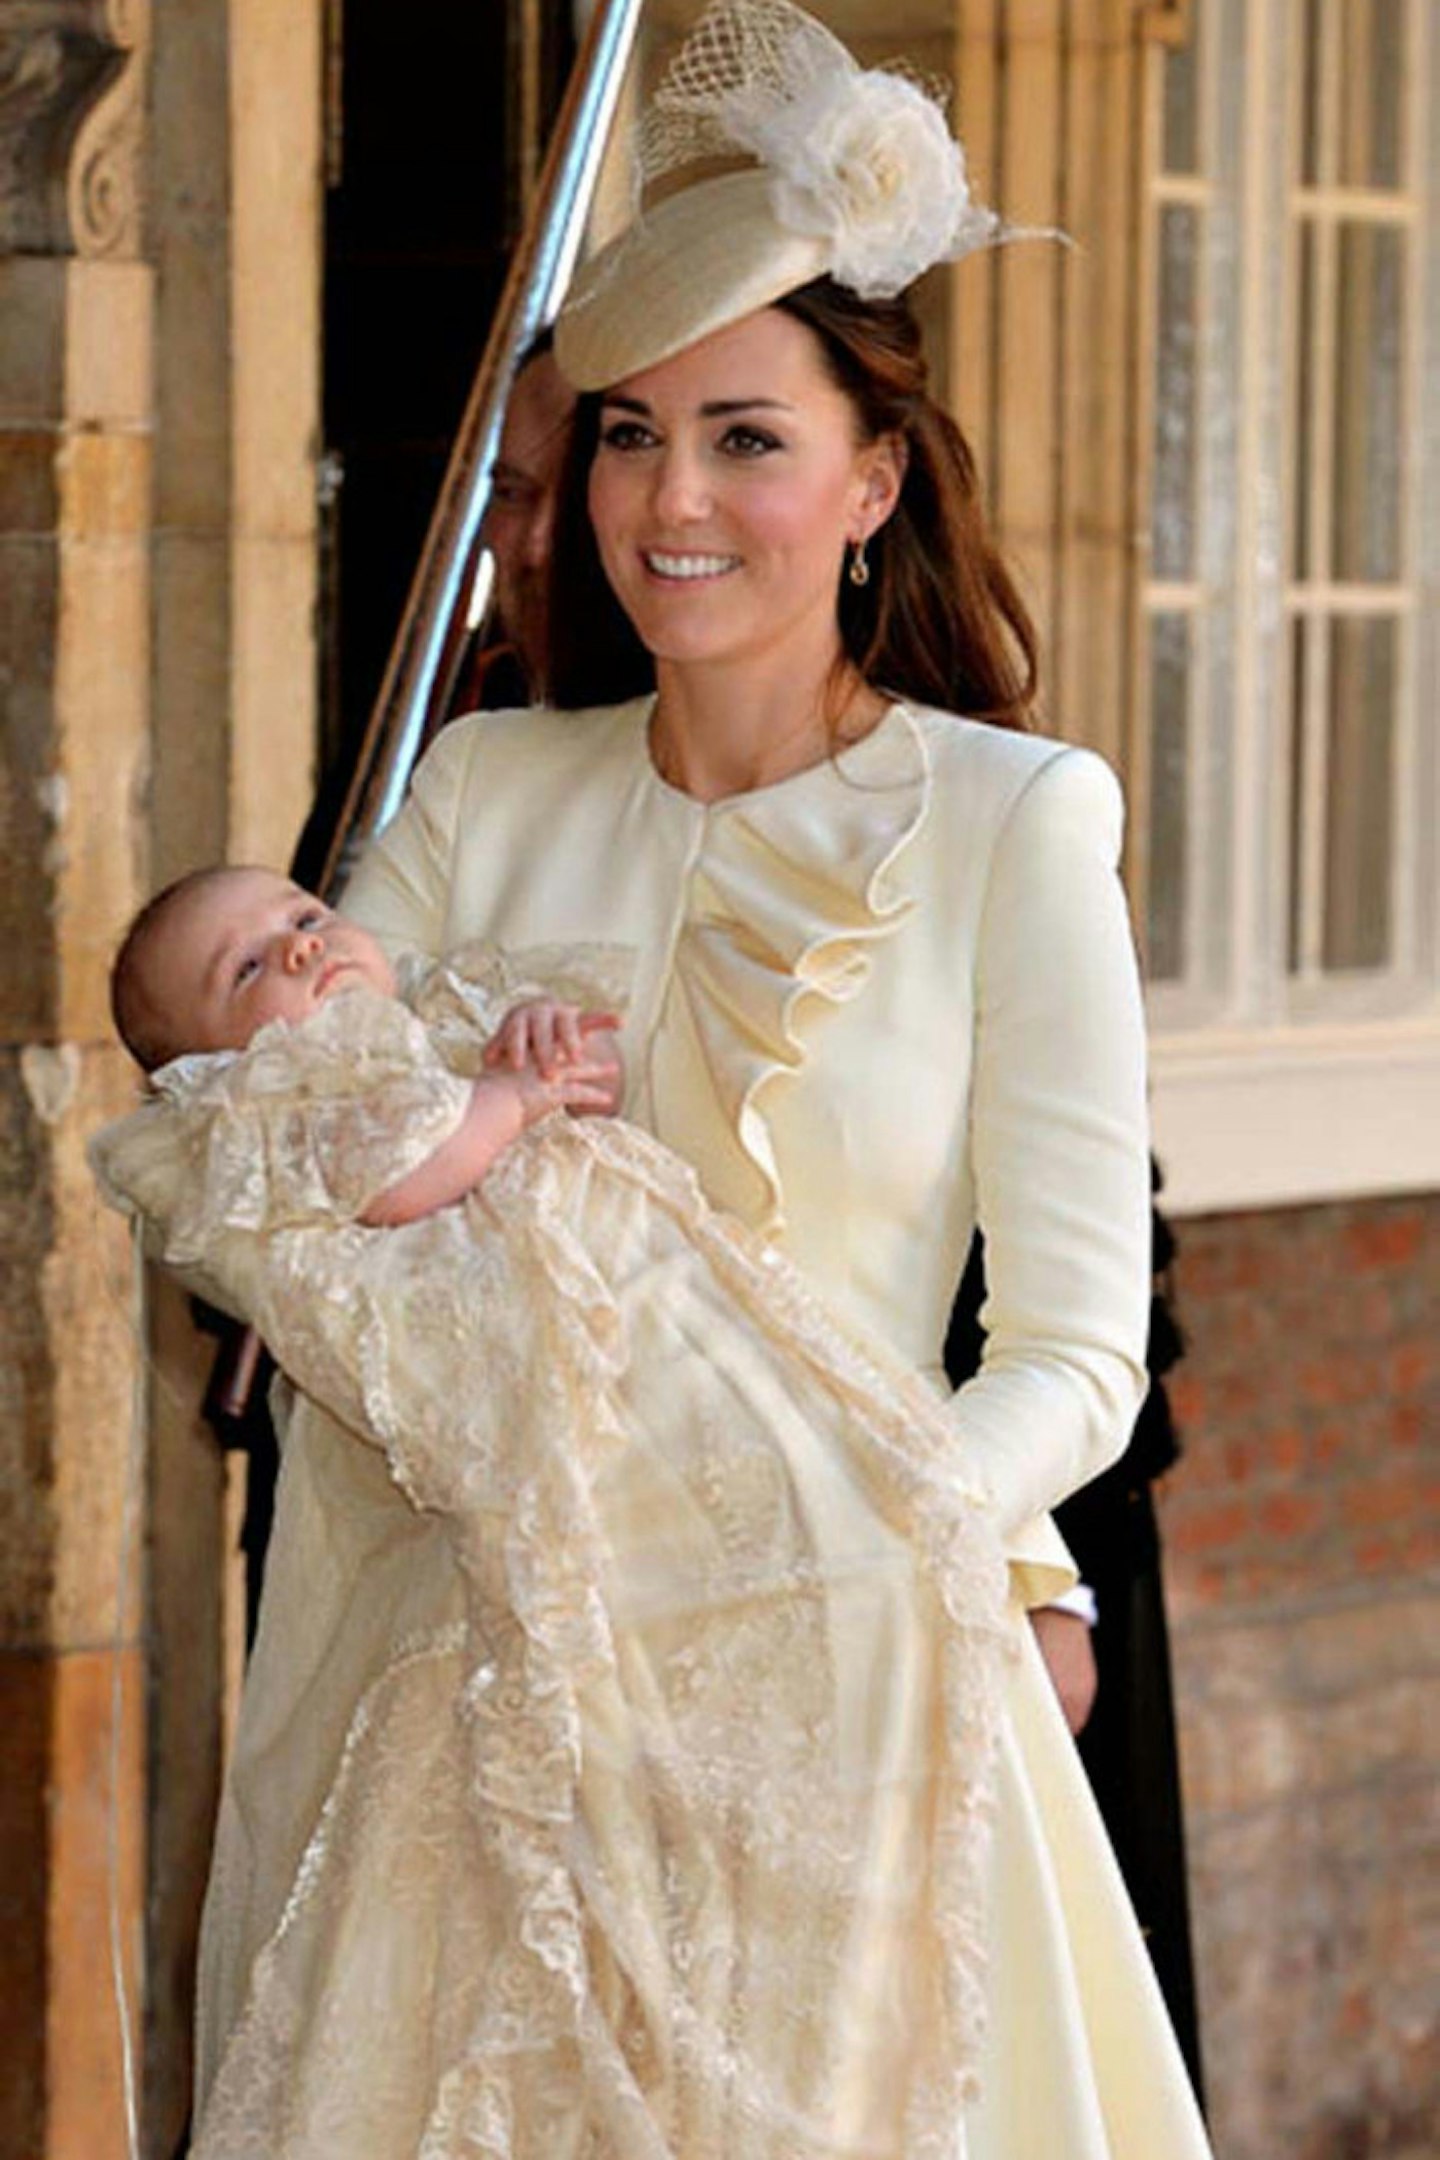 Kate Middleton wears Alexander McQueen at Prince George's christening, 23 October 2013